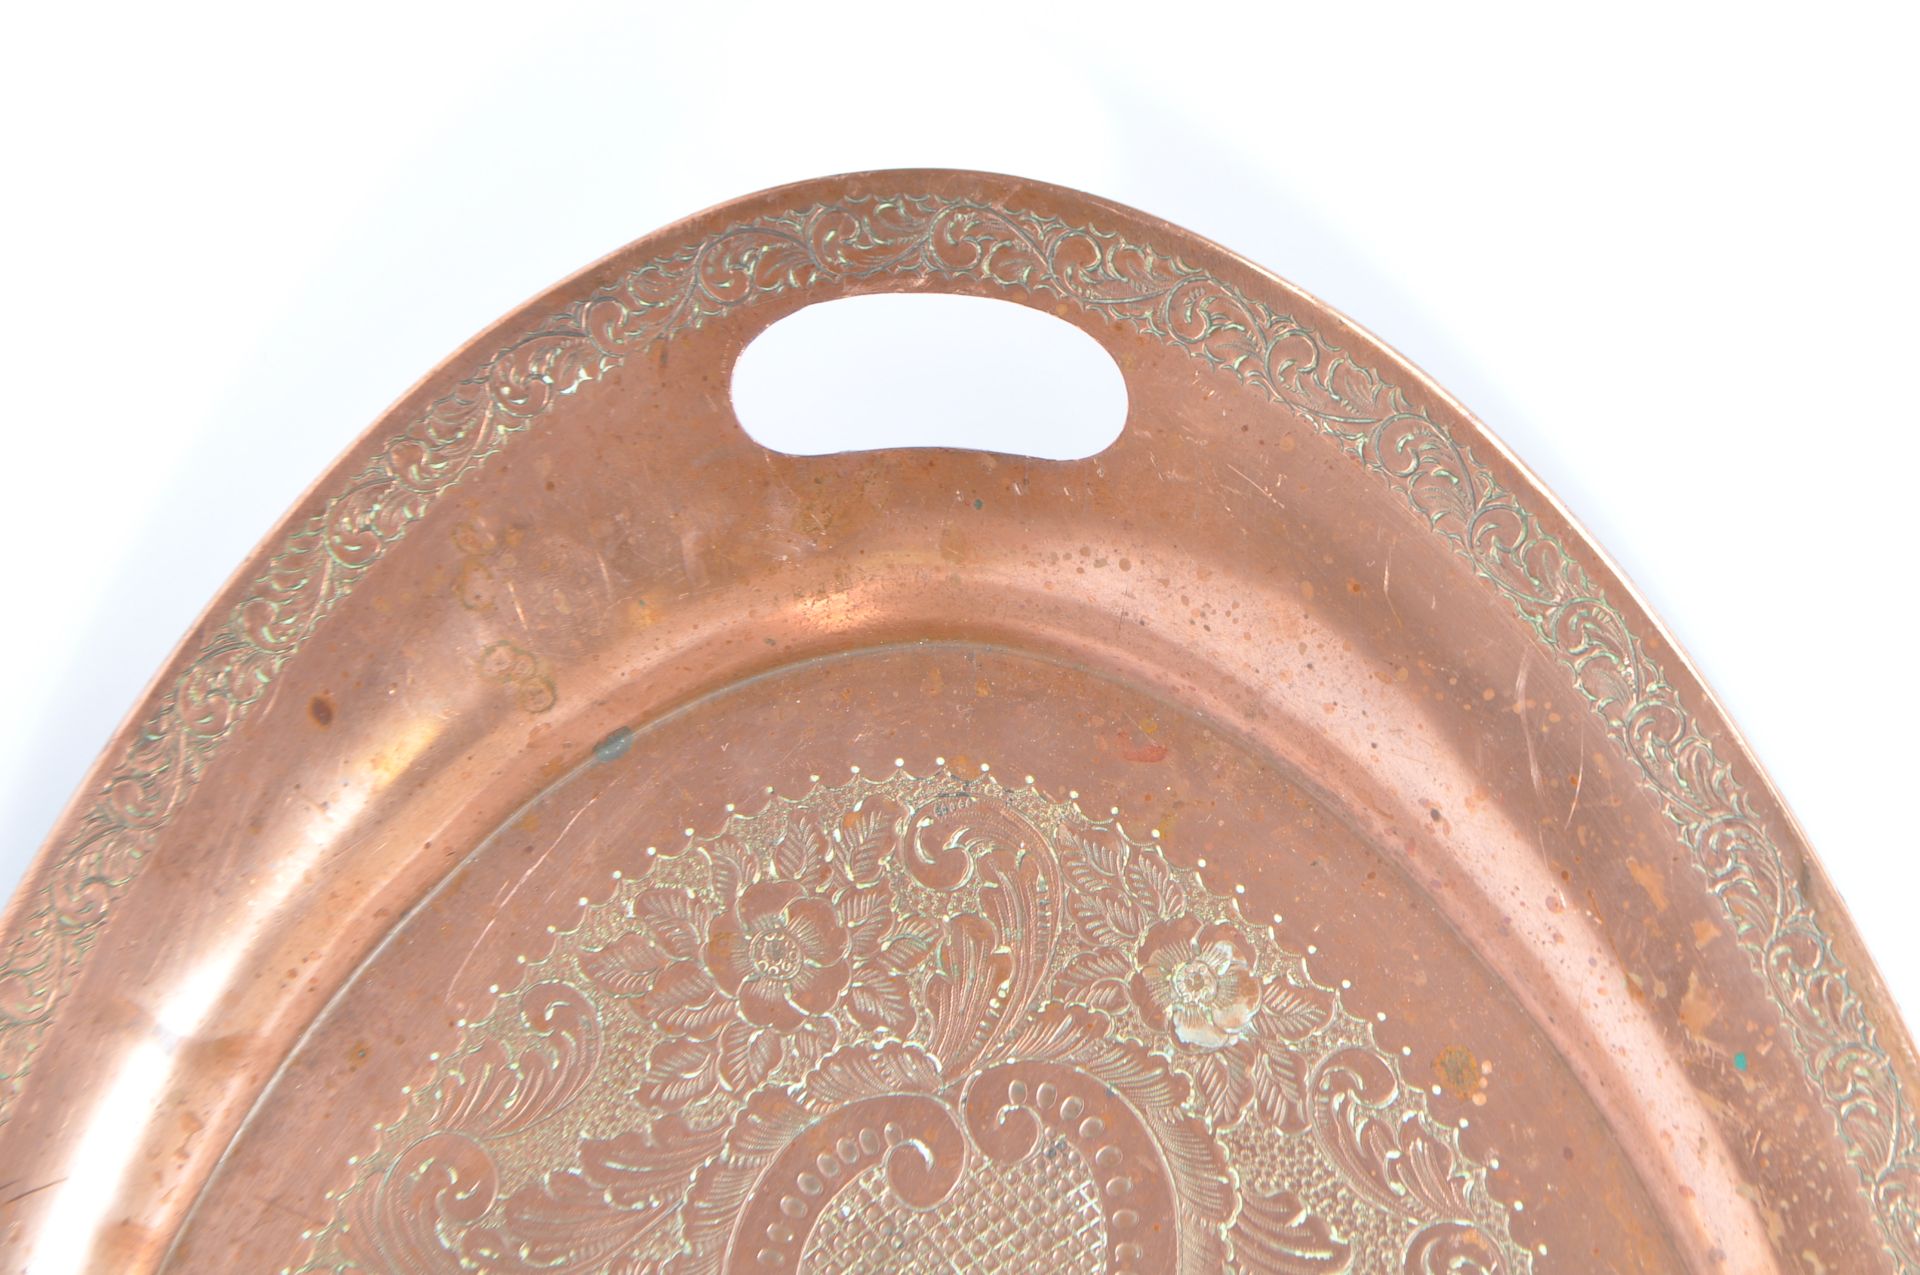 MID 20TH CENTURY OVAL INLAID ORNATE SCROLLWORK COPPER TRAY - Image 3 of 4